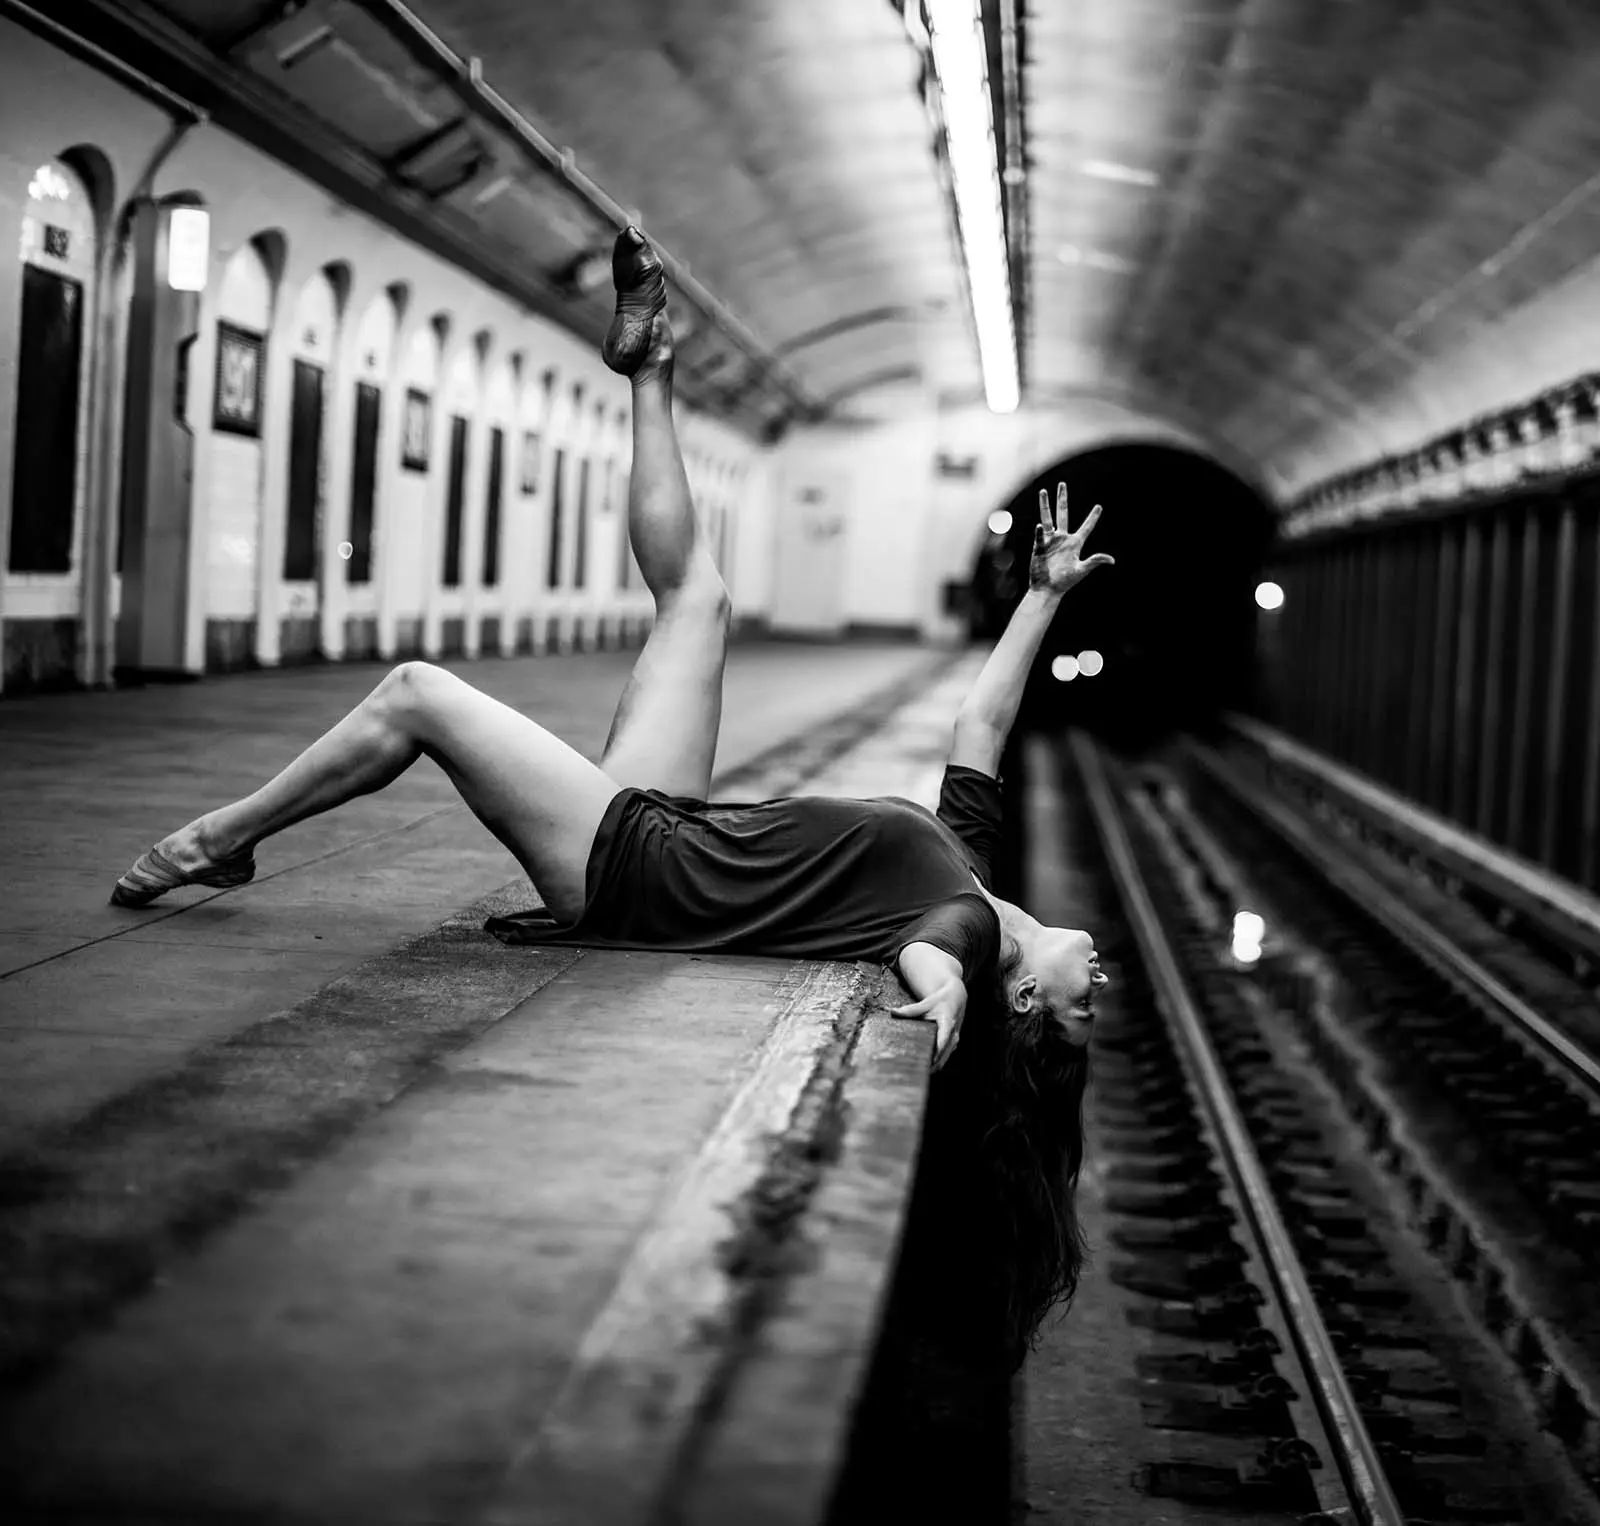 woman posing on the ground of a subway station.